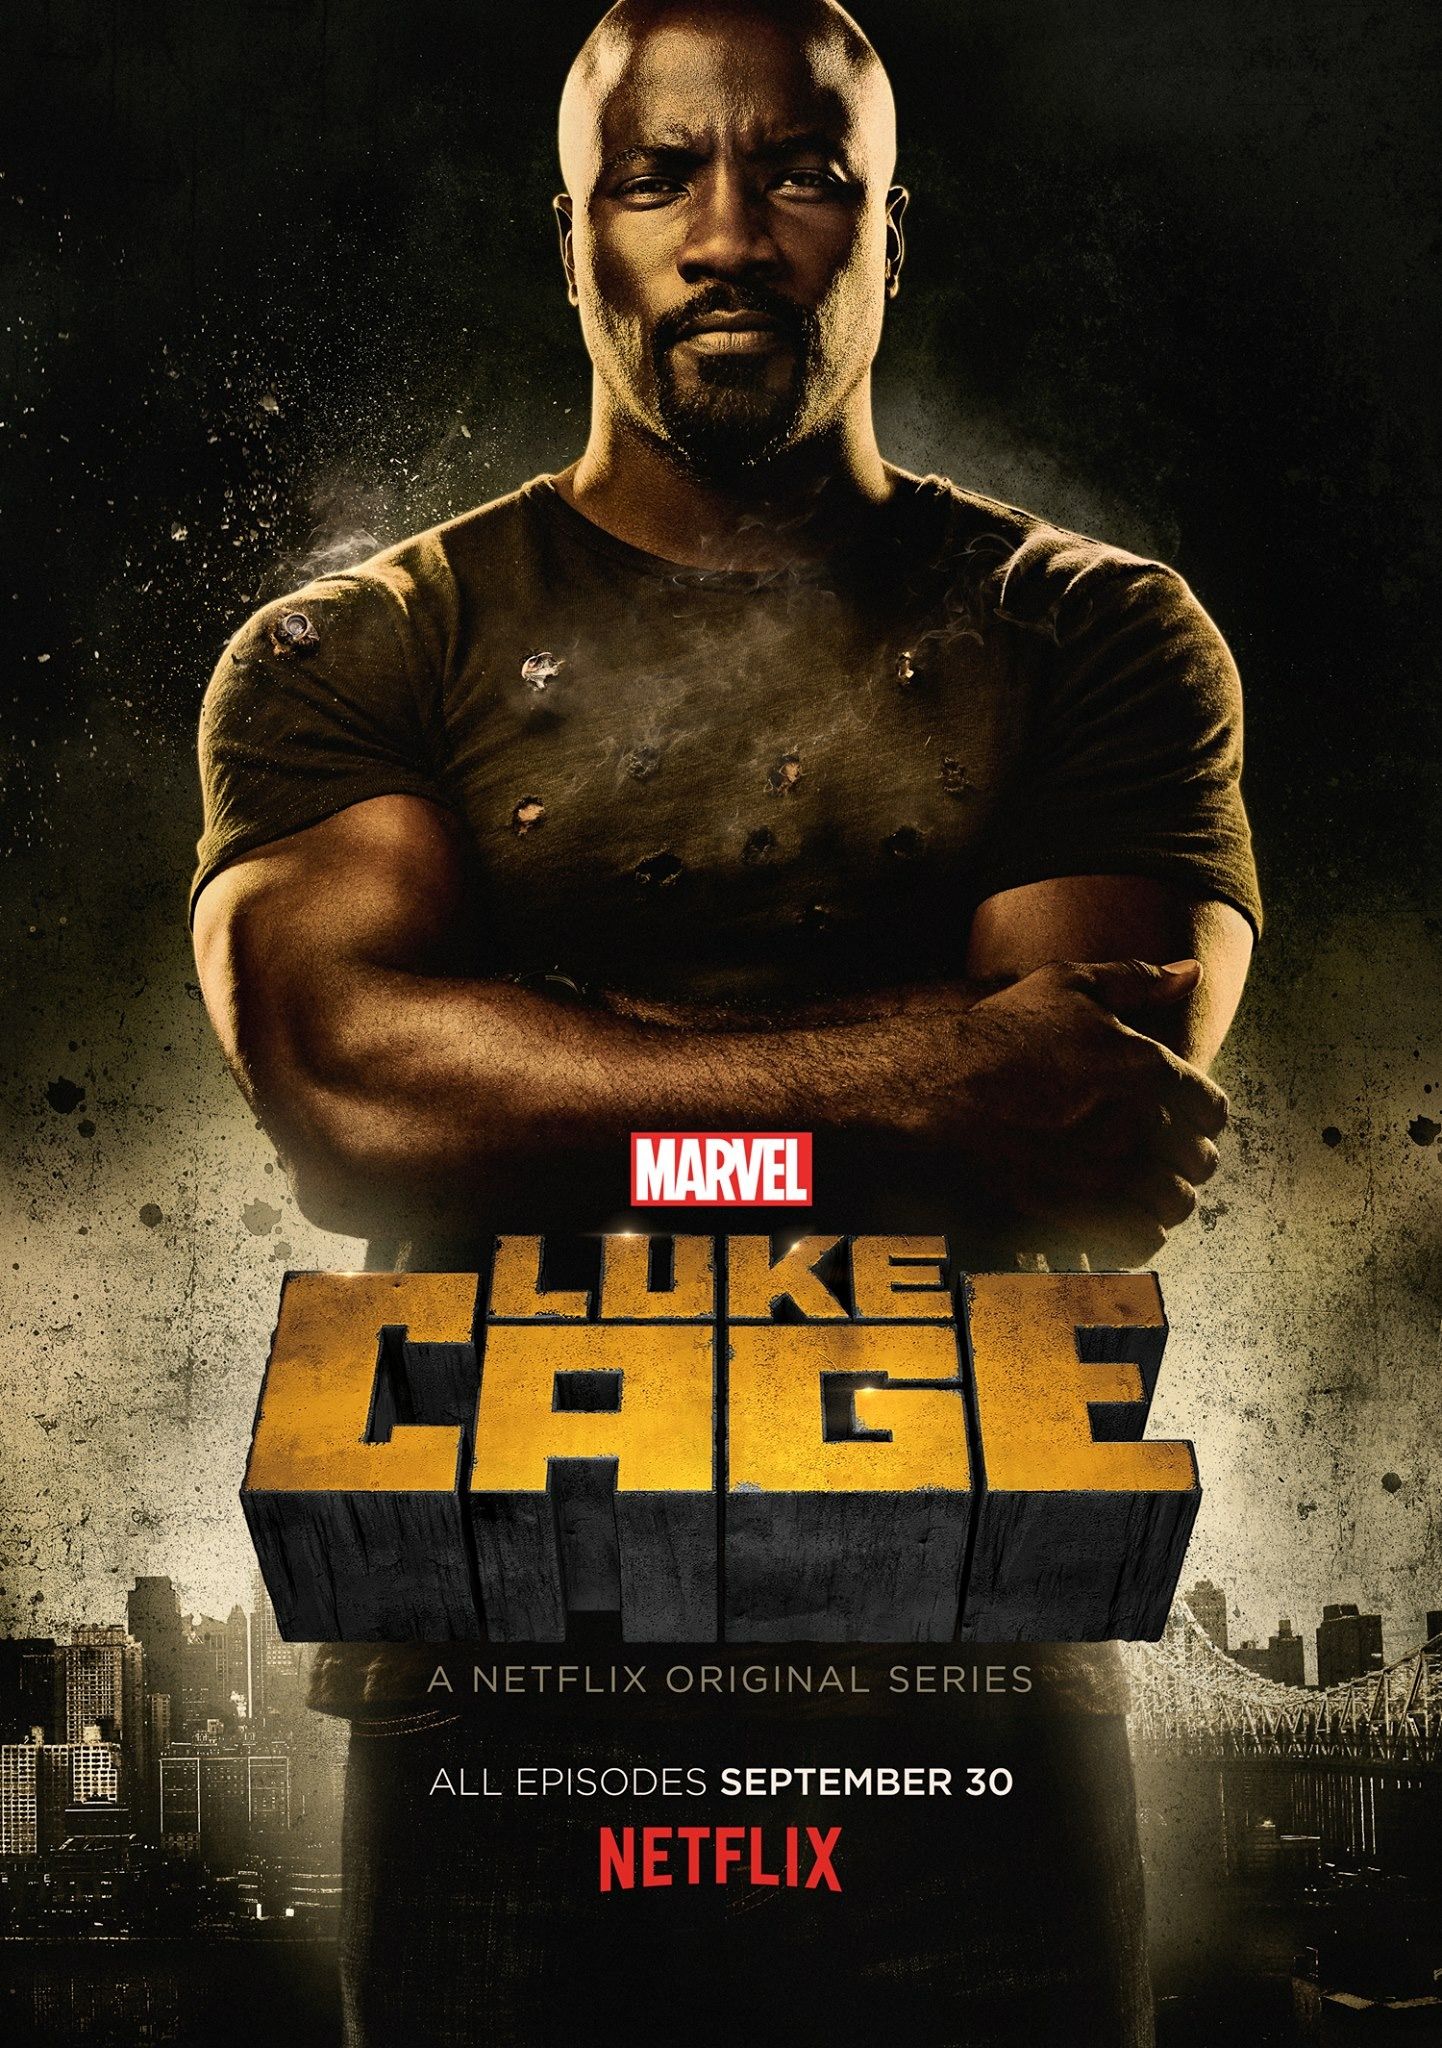 New poster for Luke Cage